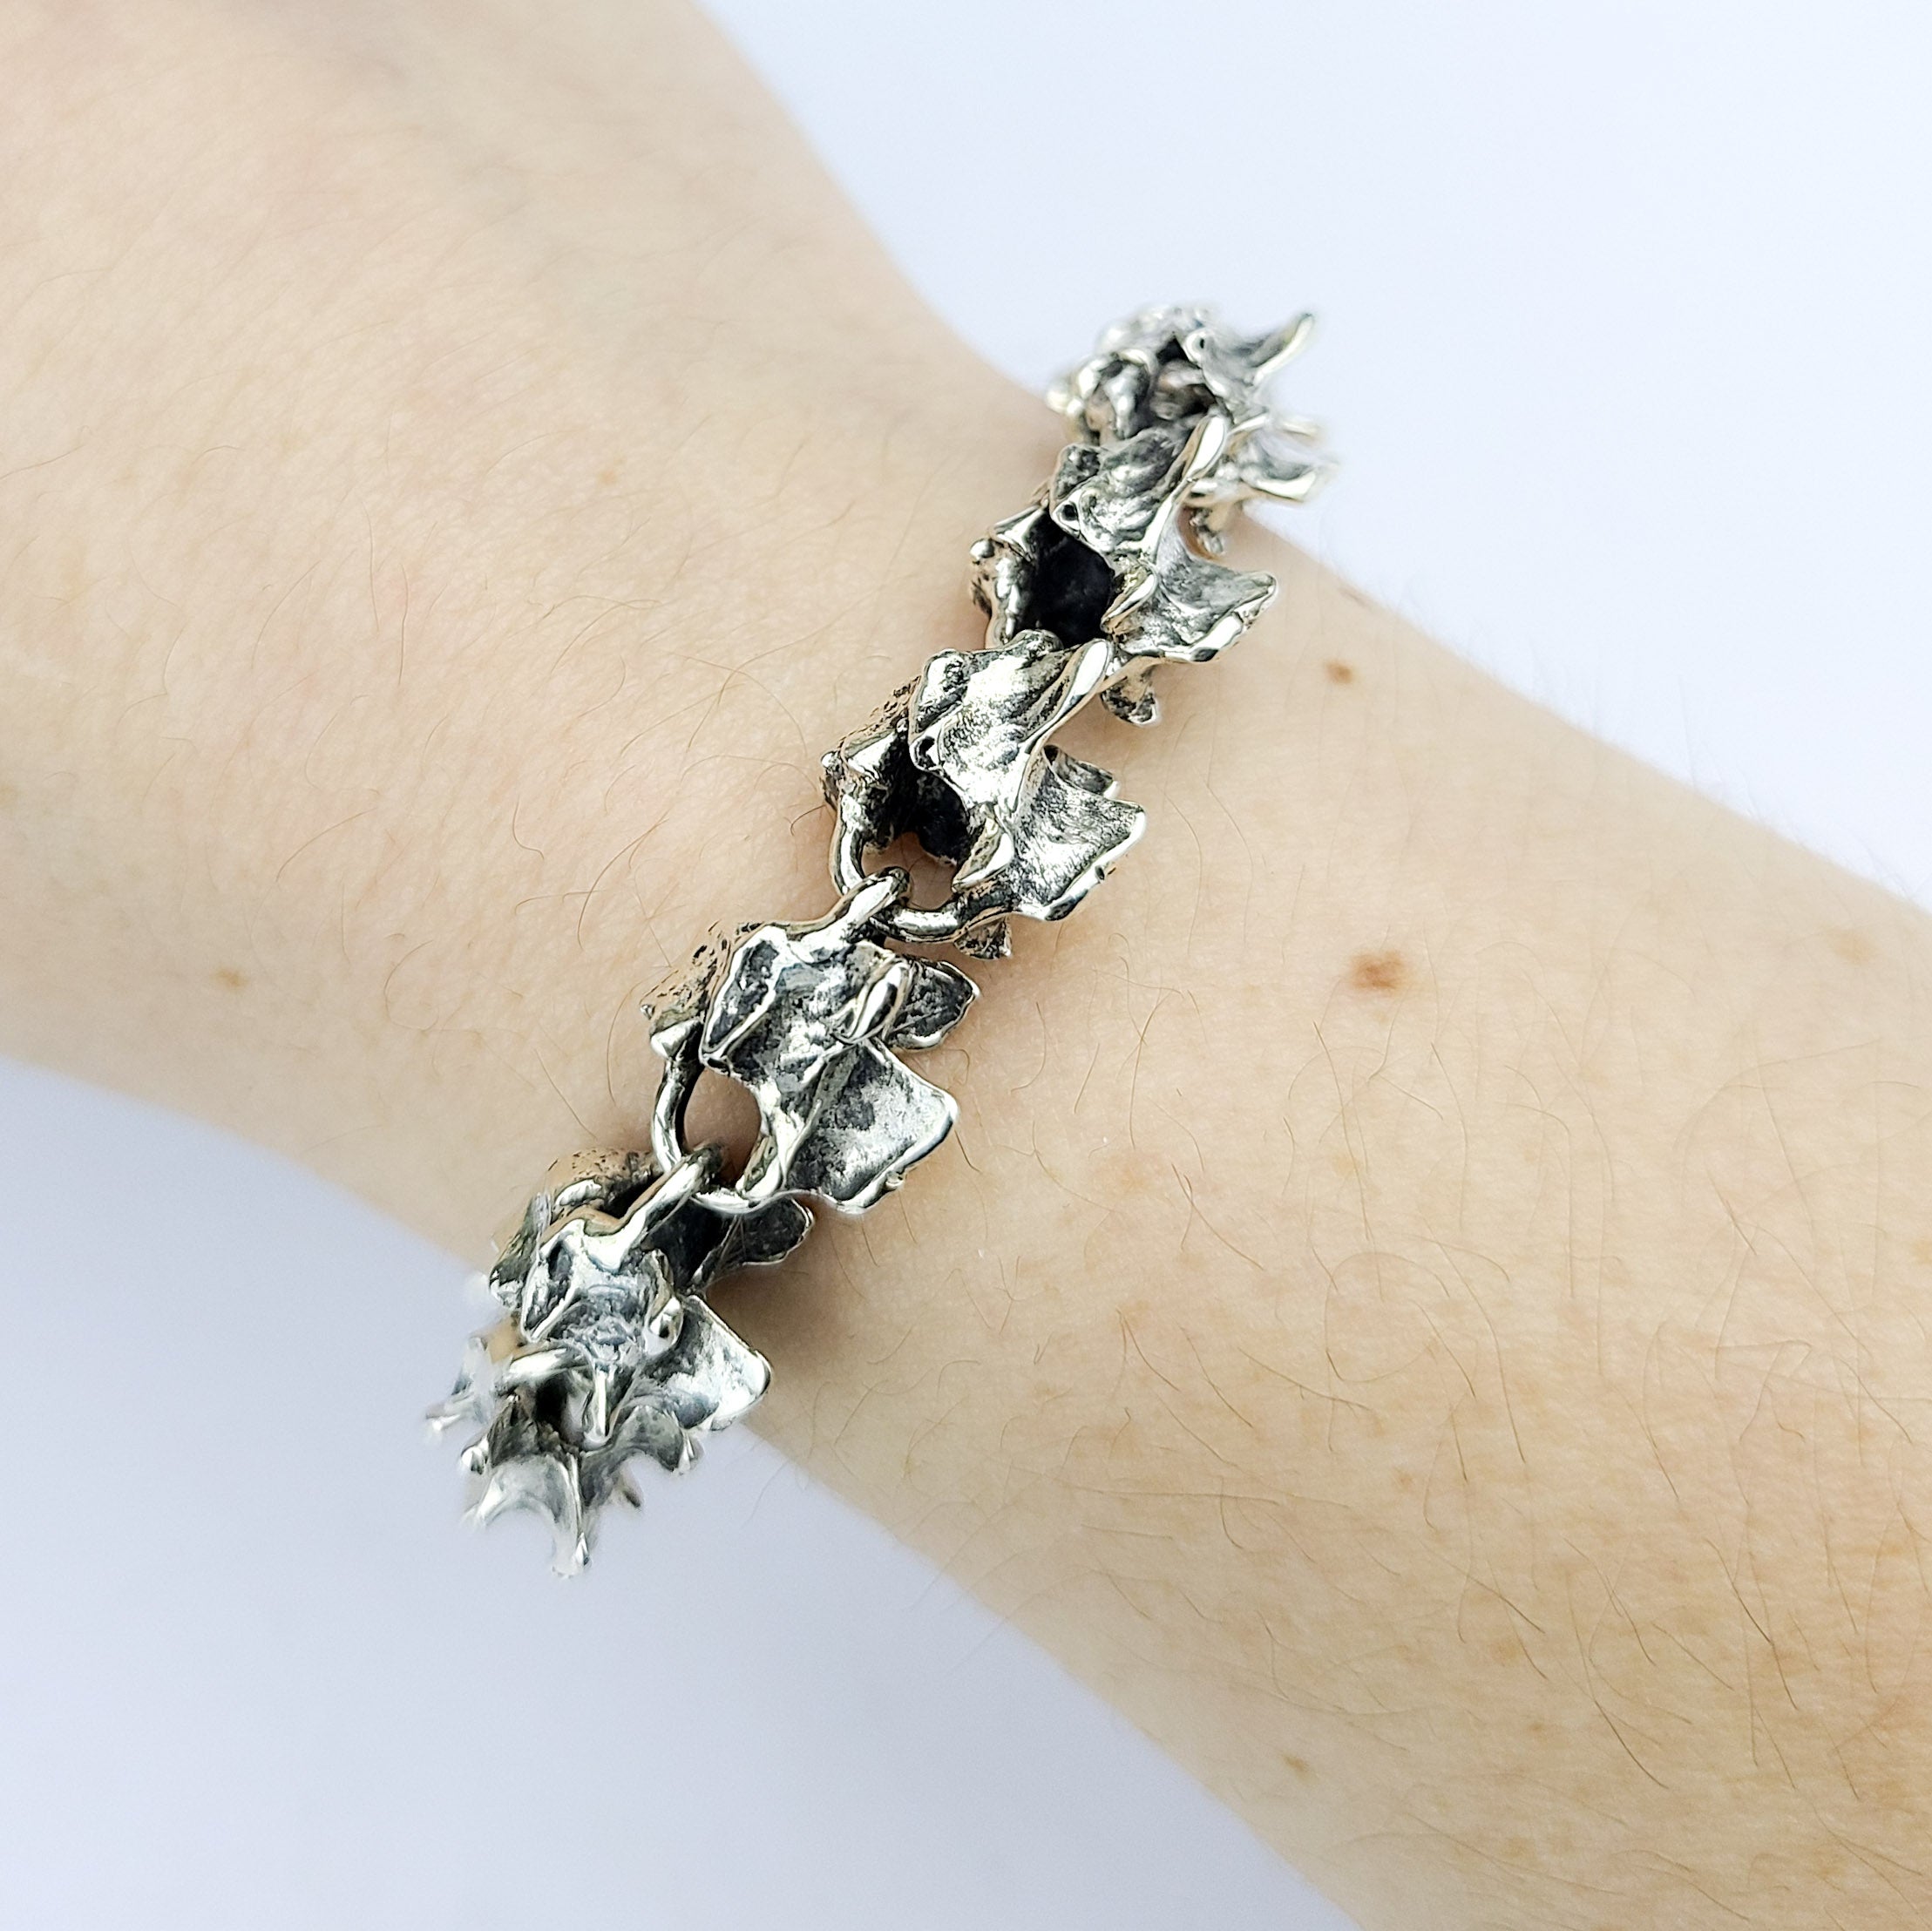 Chunky 925 Sterling Silver Chain Link Bracelet, Geometric Thick Chain Bangle  - Etsy Sweden | Chunky silver bracelet, Chain link bracelet, 925 sterling  silver chain